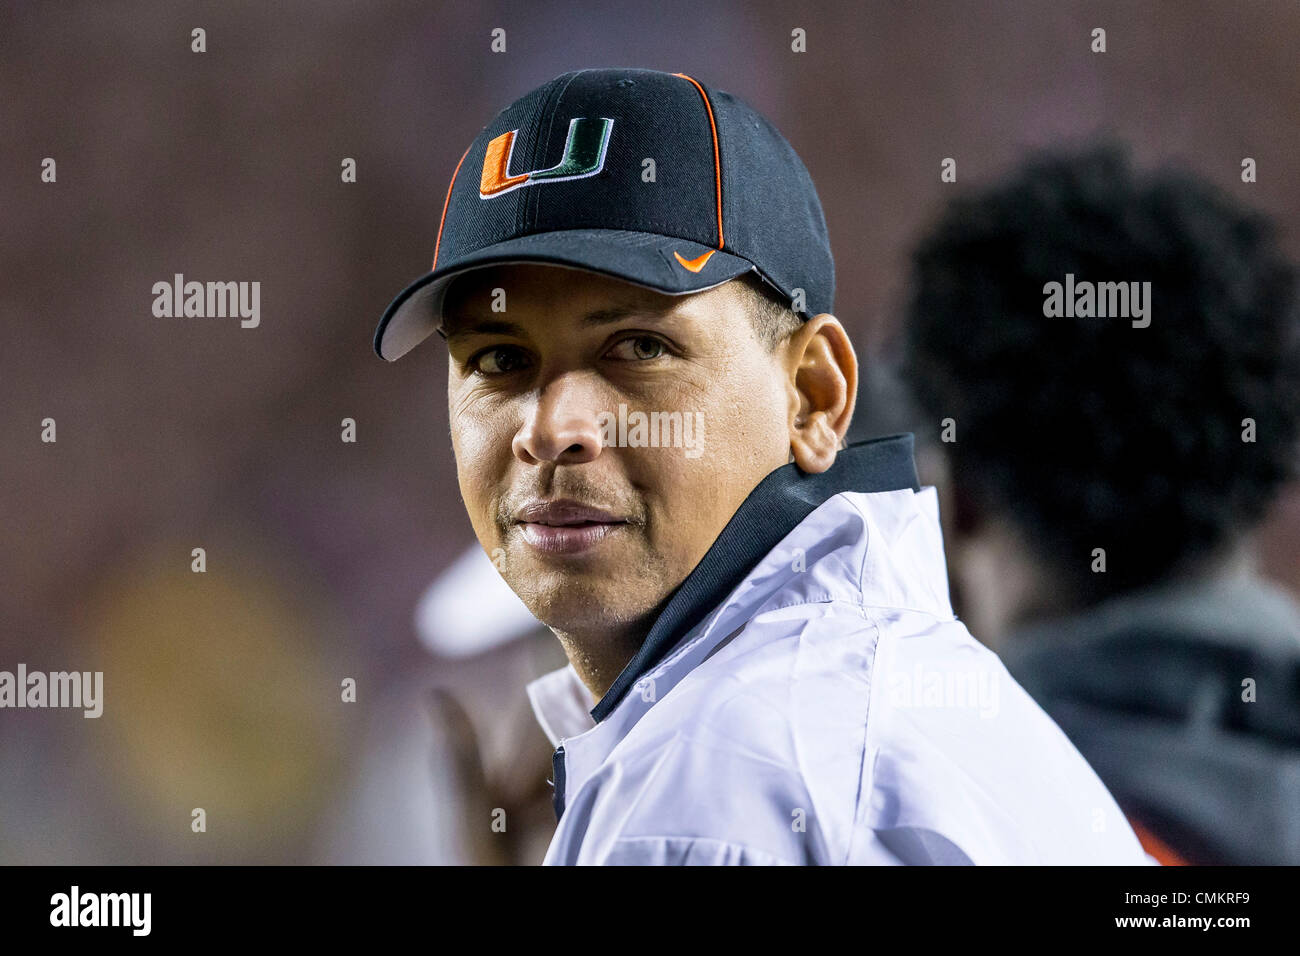 Tallahassee, Florida, USA. 2nd Nov, 2013. Miami Hurricanes fan and NY Yankee baseball player Alex Rodriguez watches the game between the Miami Hurricanes and the Florida State Seminoles at Doak S. Campbell Stadium. Florida State defeated Miami 41-14. Credit:  Cal Sport Media/Alamy Live News Stock Photo